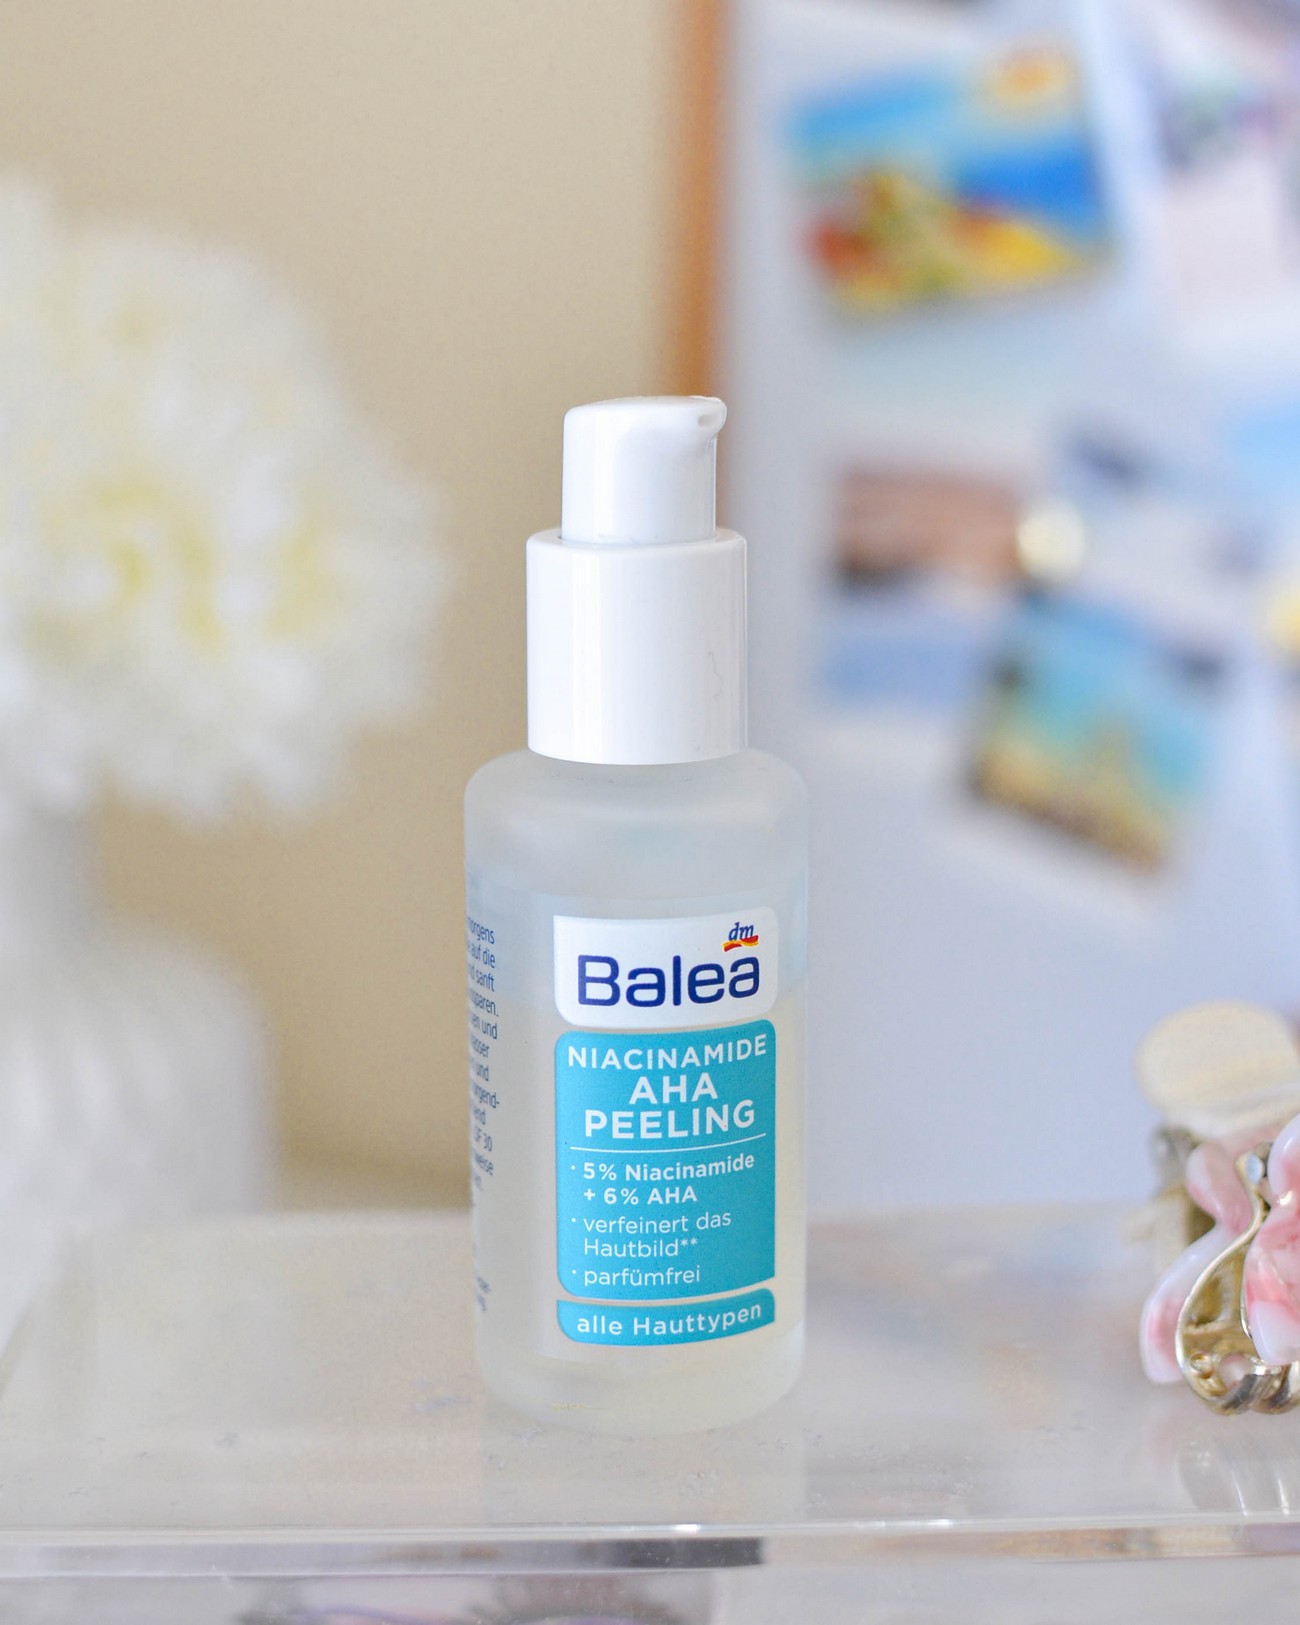 New Products from Balea (First Impressions)